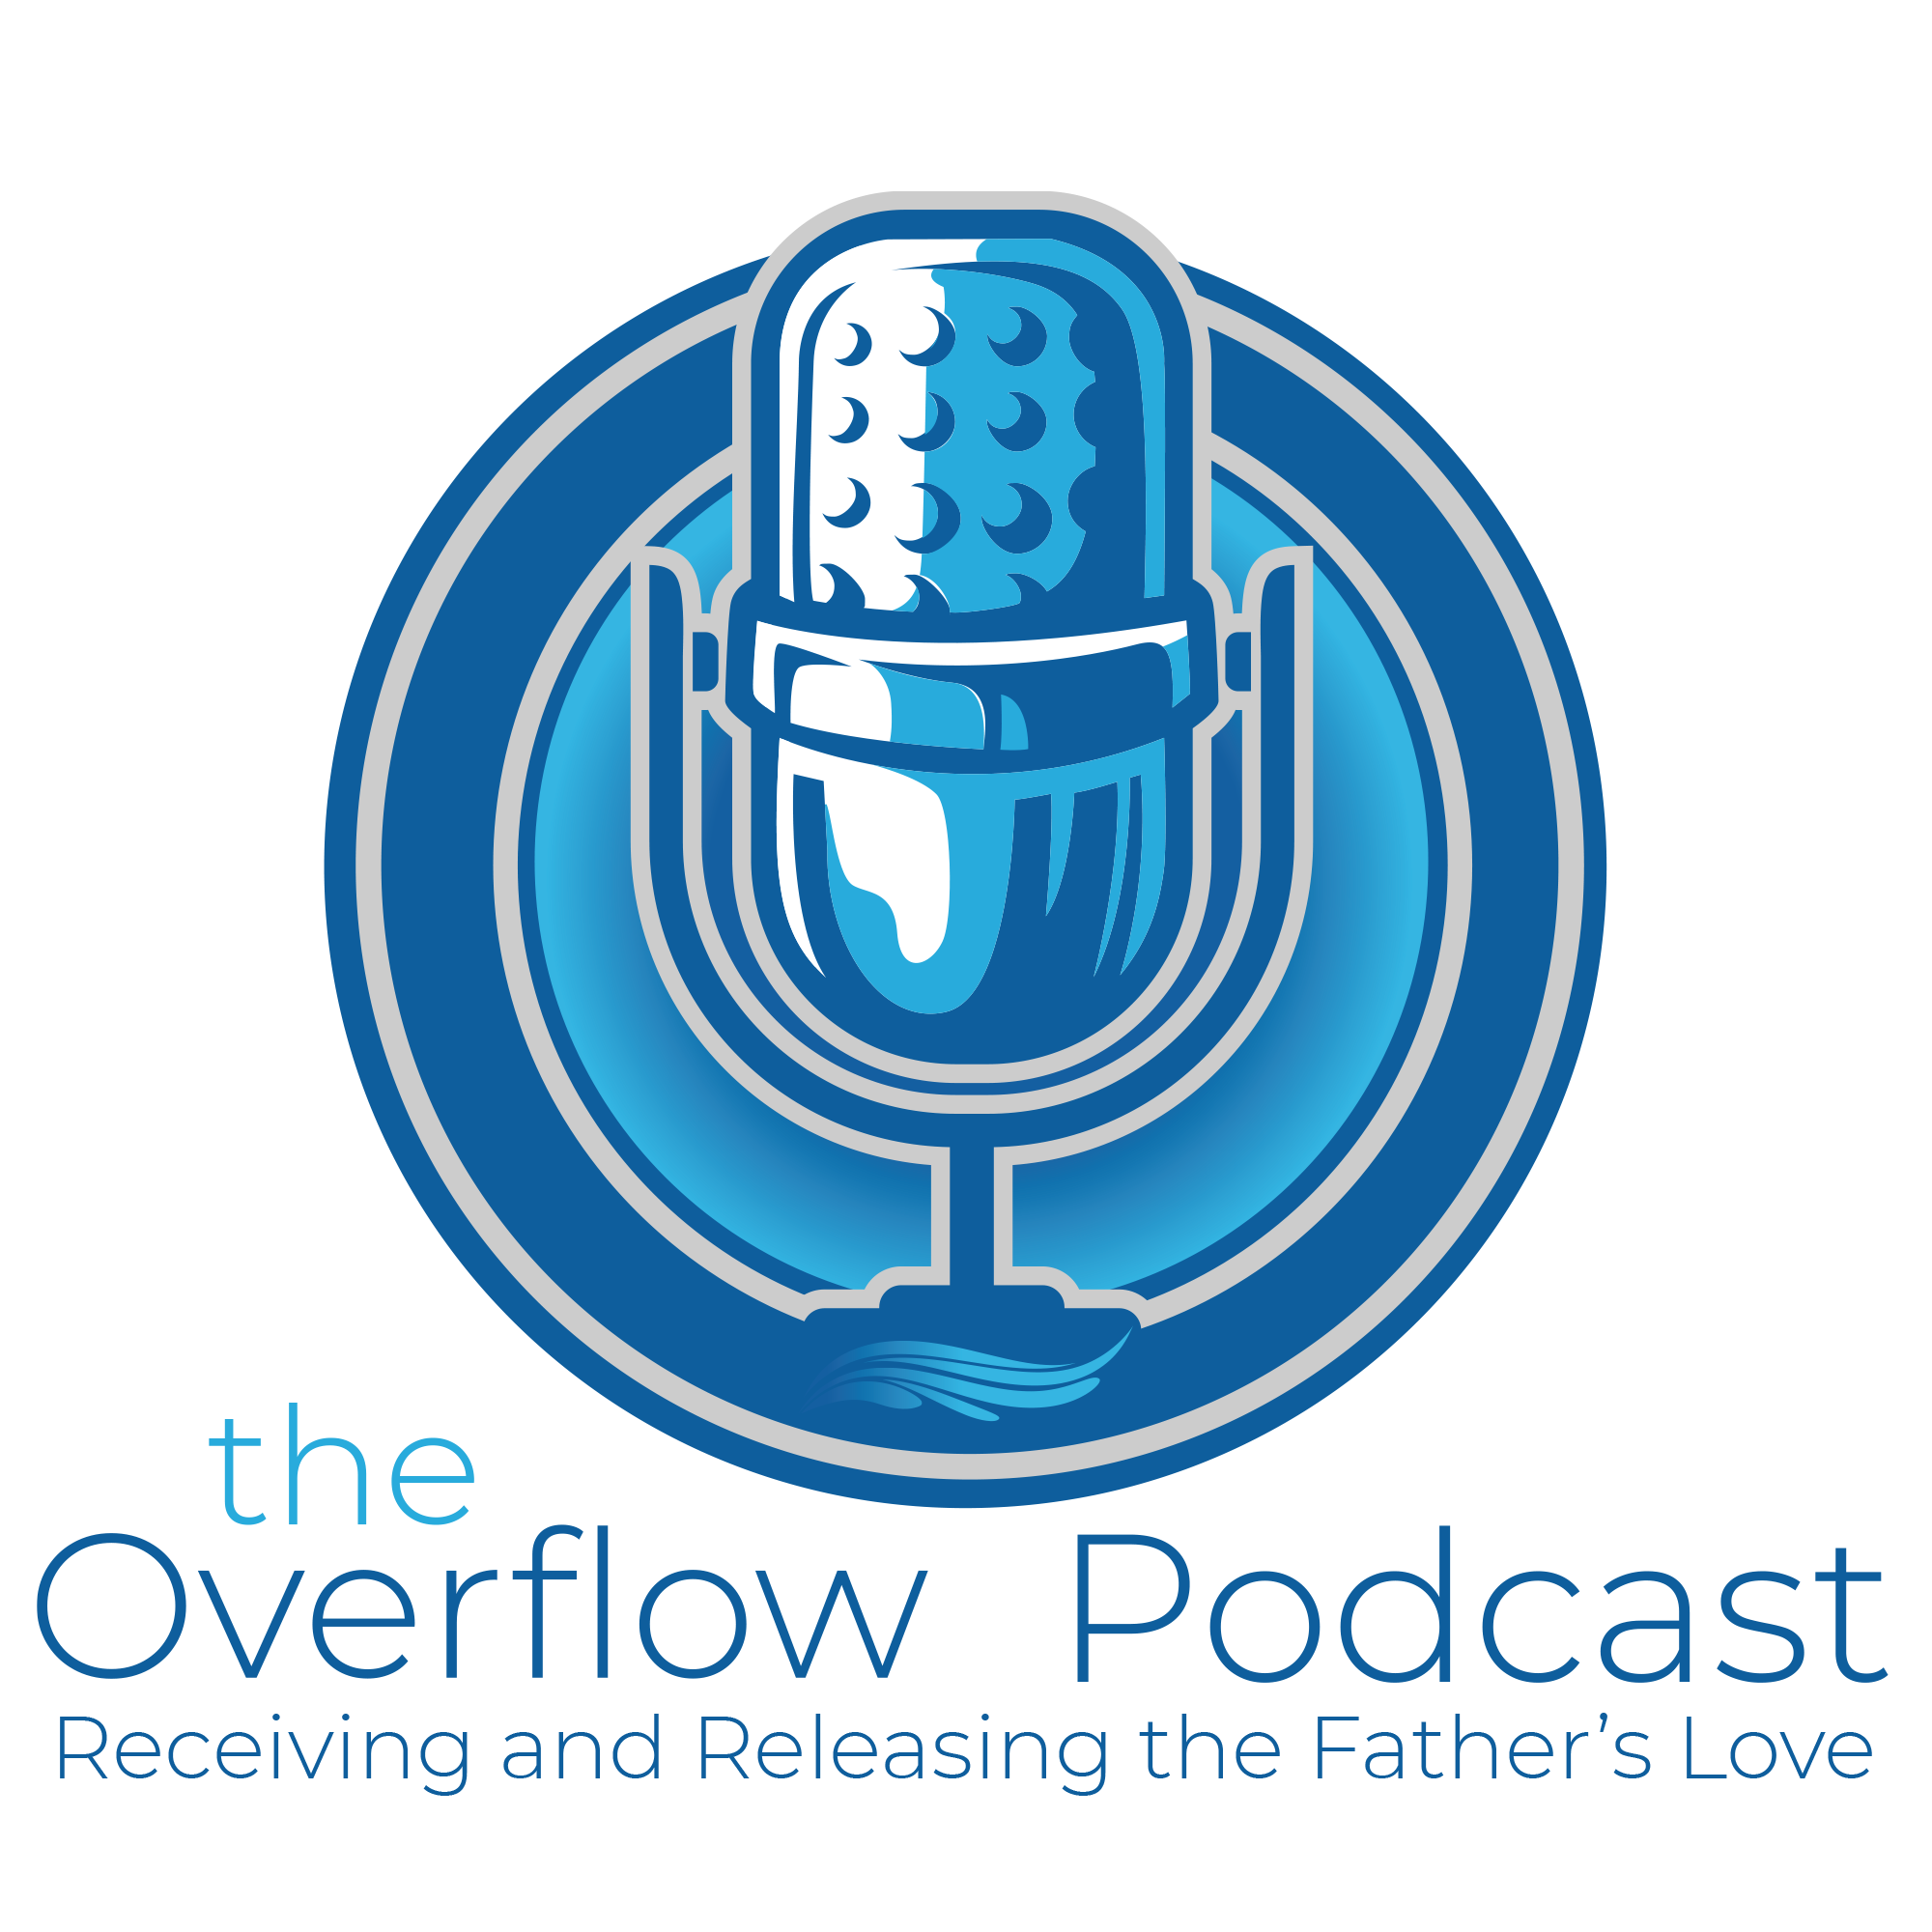 The Overflow Podcast